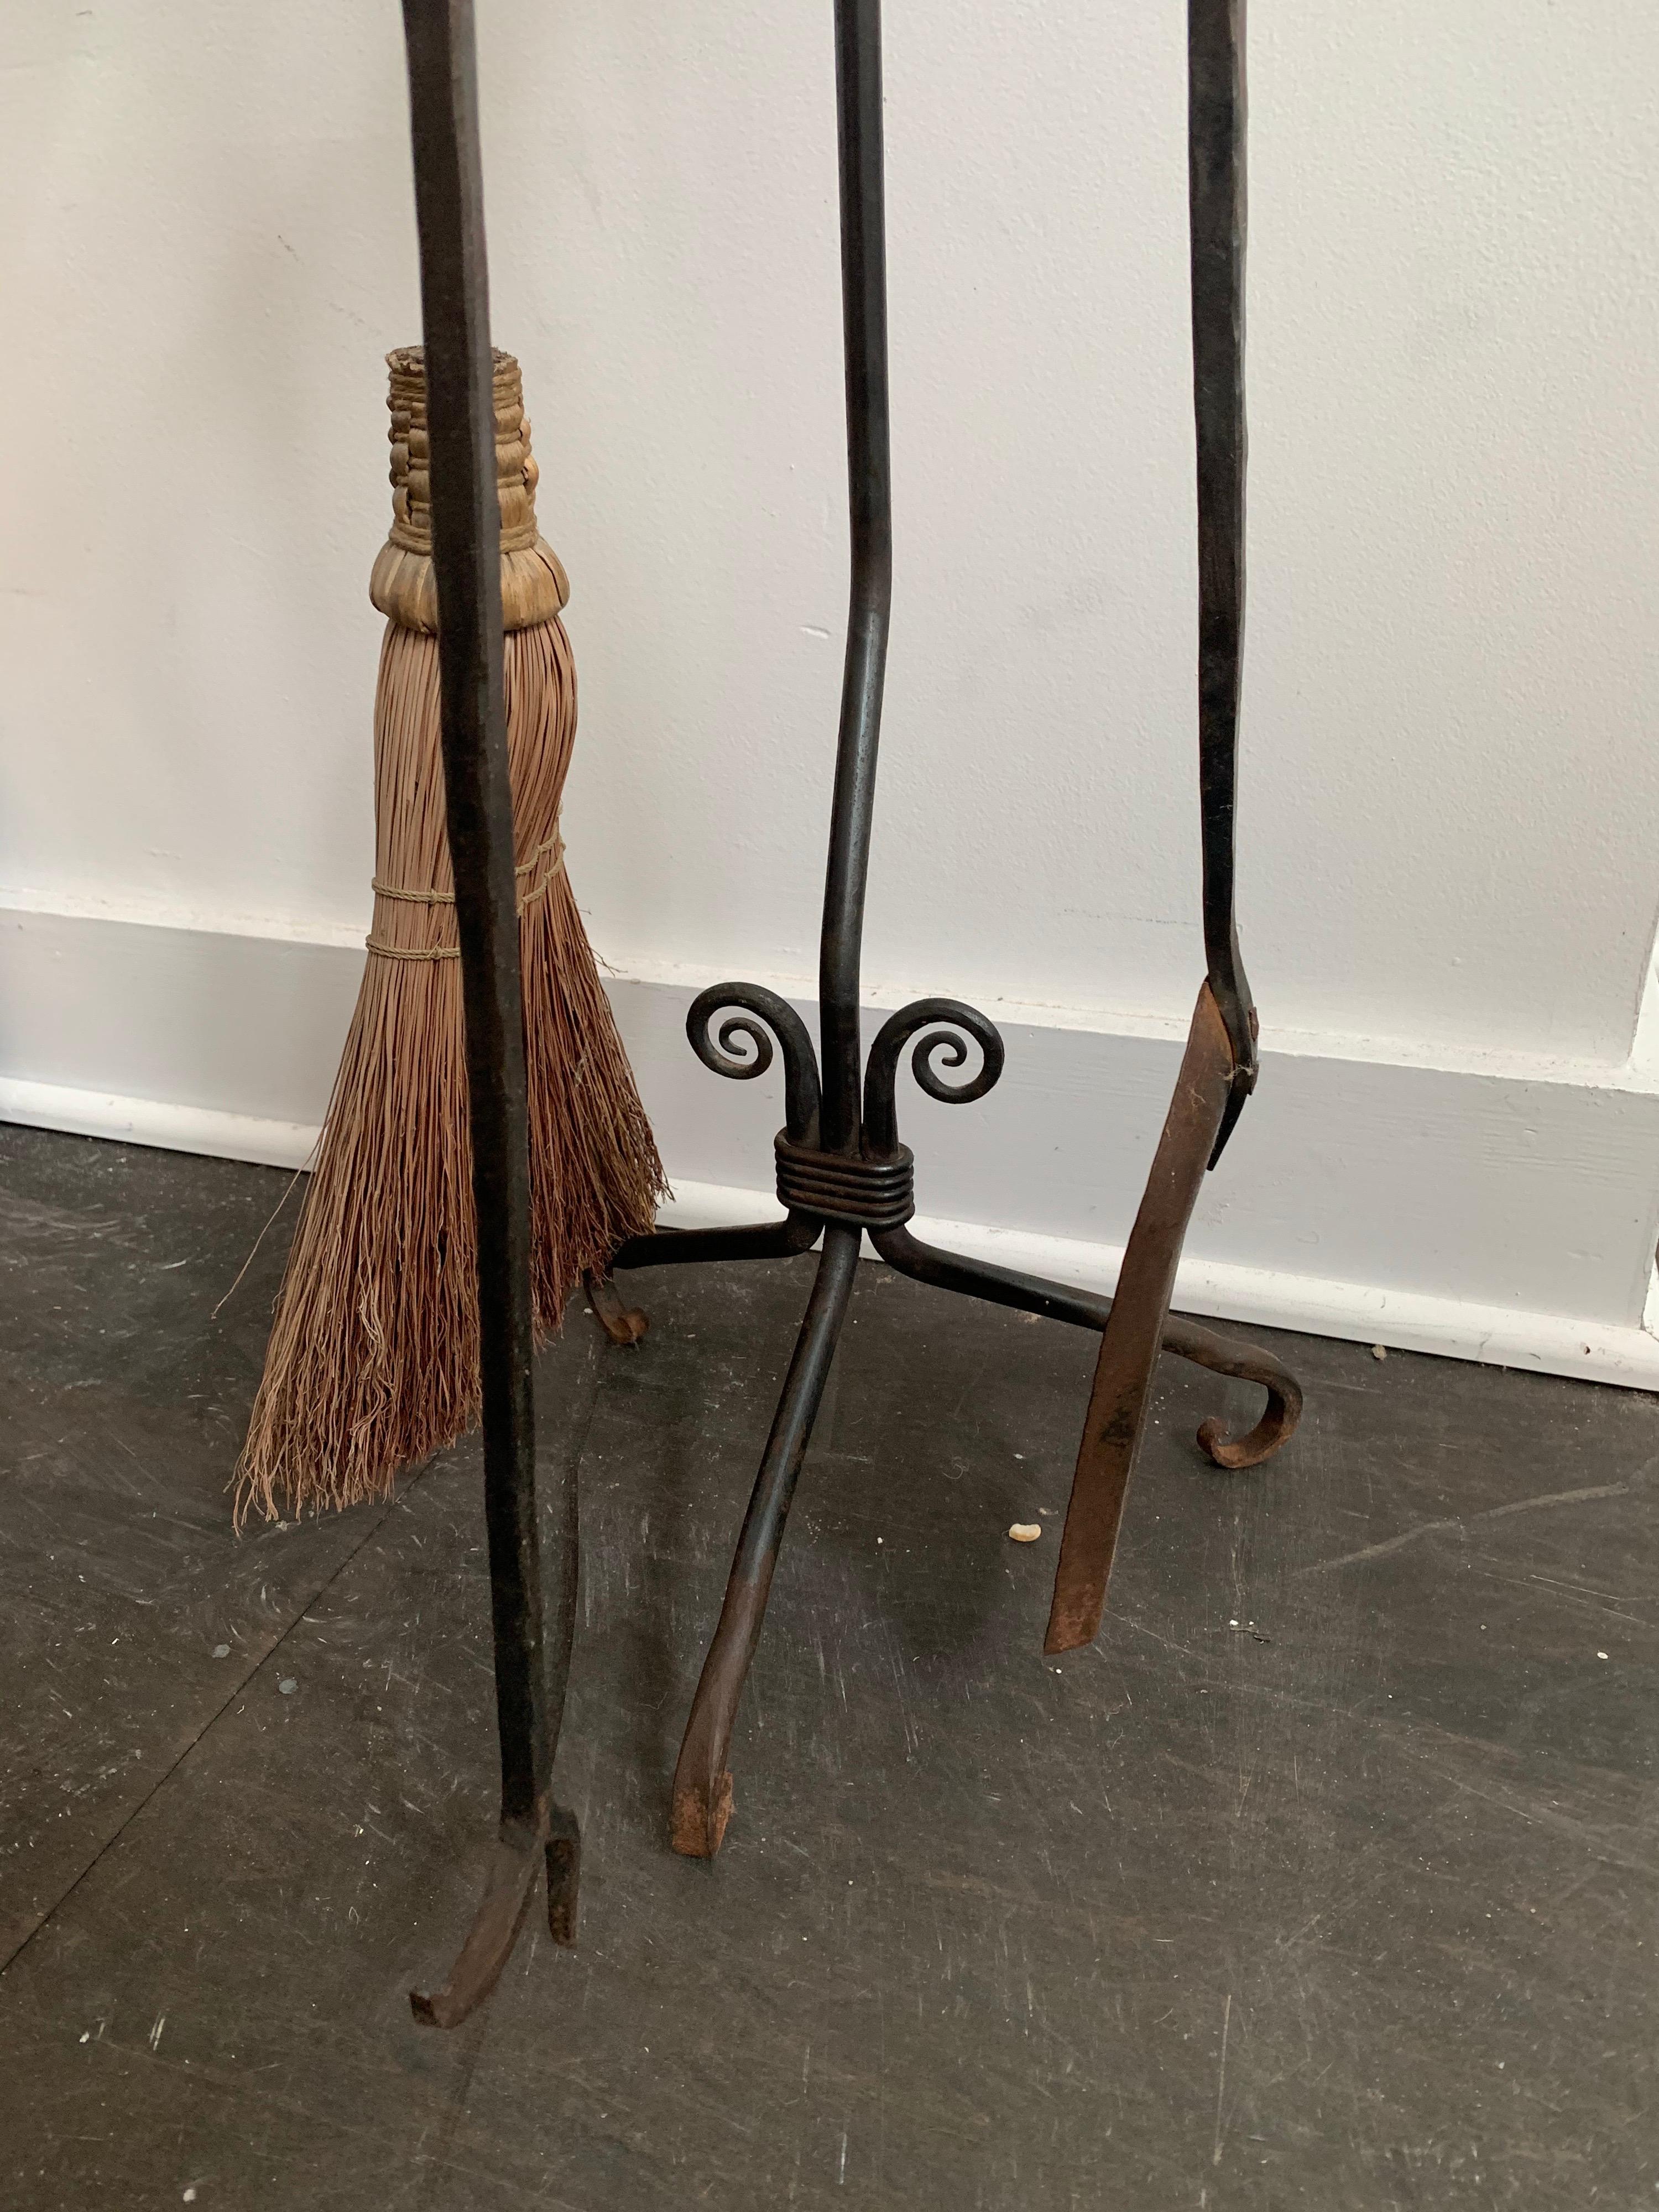 These very cool fireplace tools with steer head handles are made of forged iron. Very nice set!